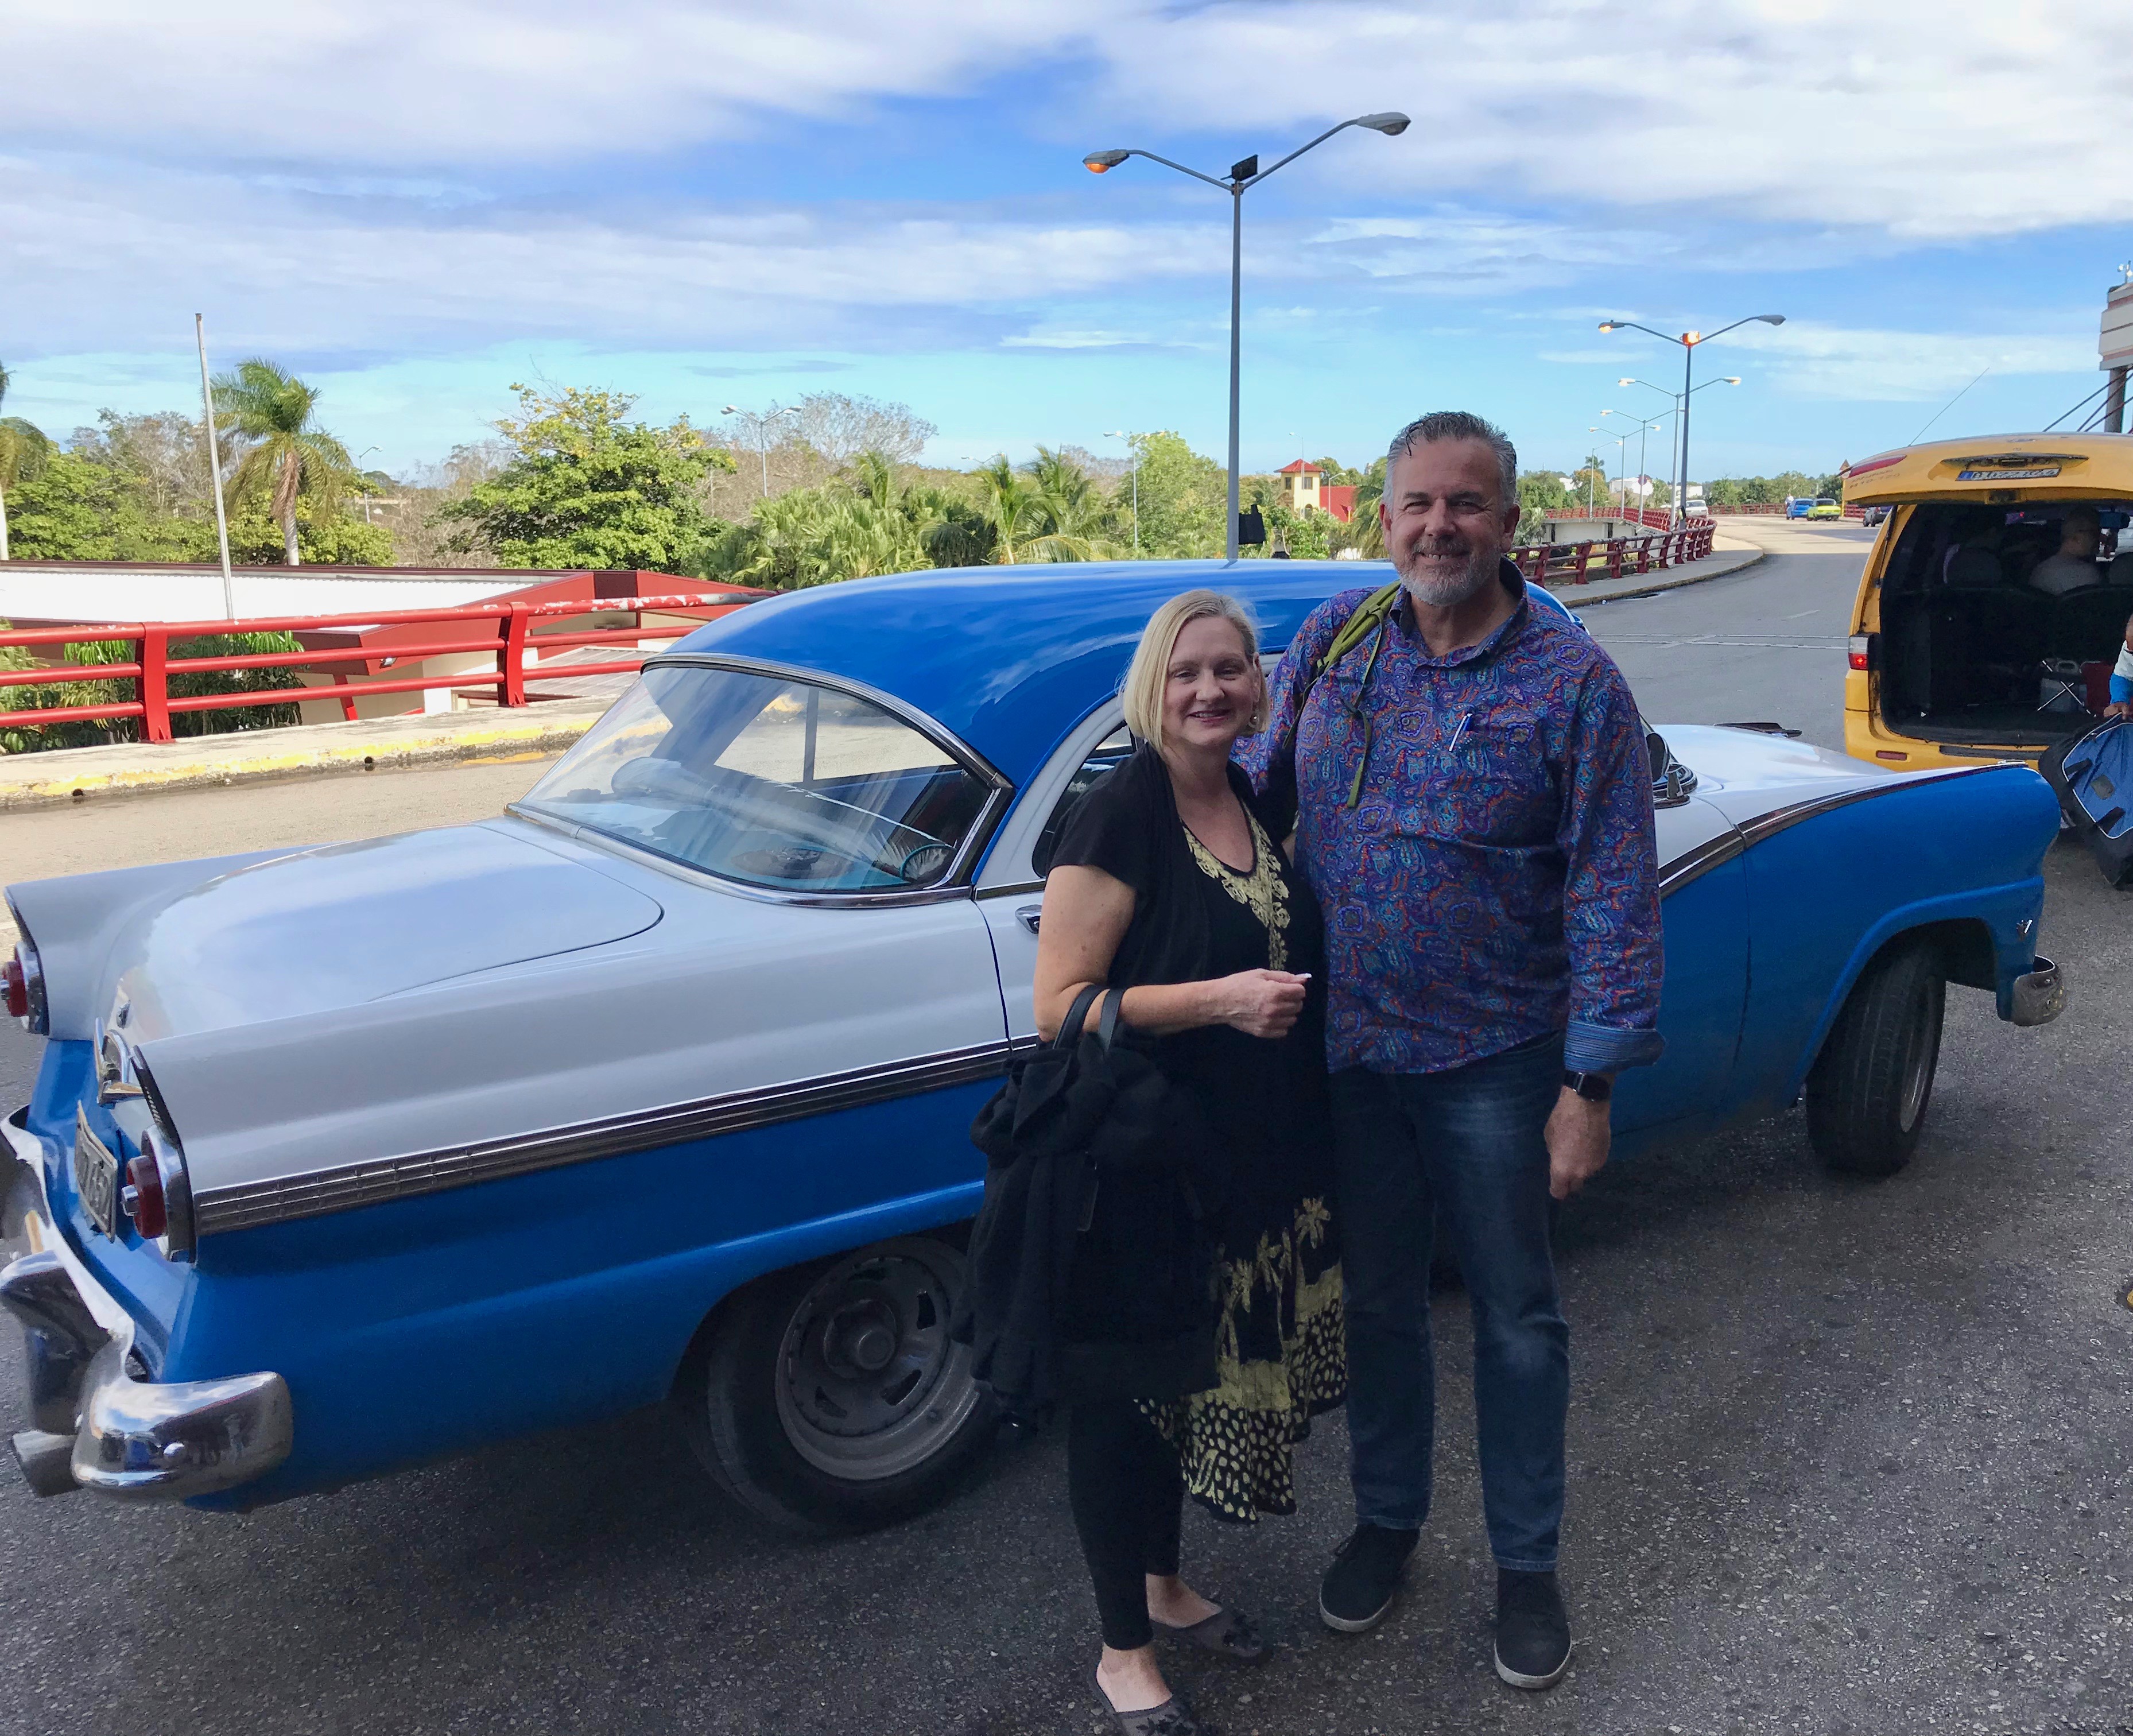 Dave and Dawn in Cuba. Quite an adventure.